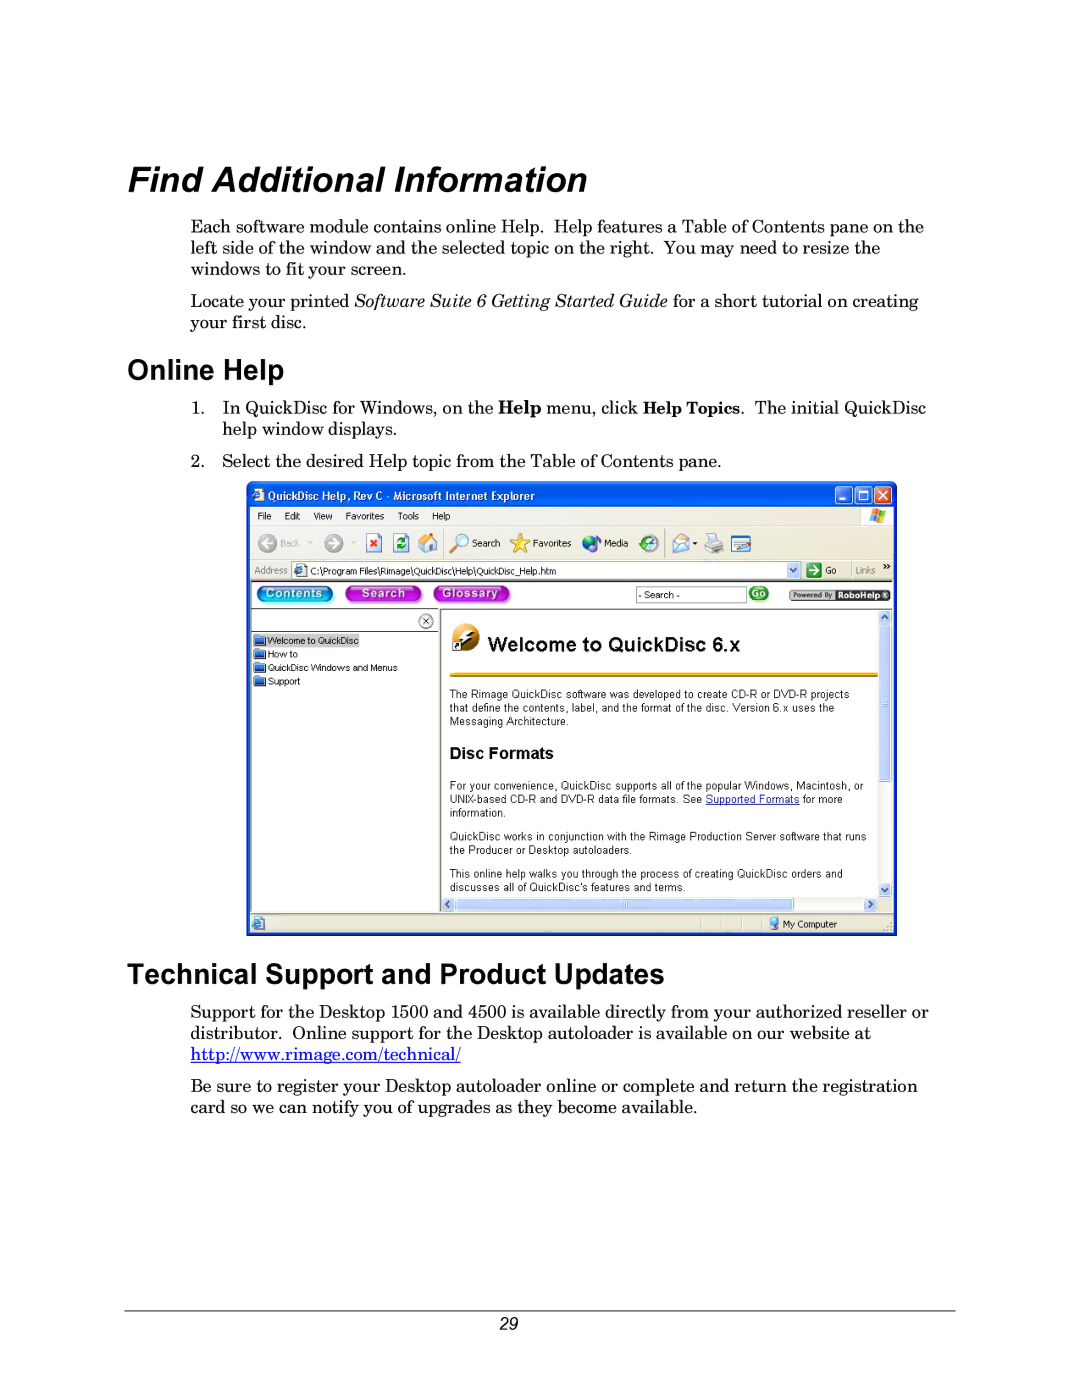 Rimage 110716-000 manual Online Help, Technical Support and Product Updates 